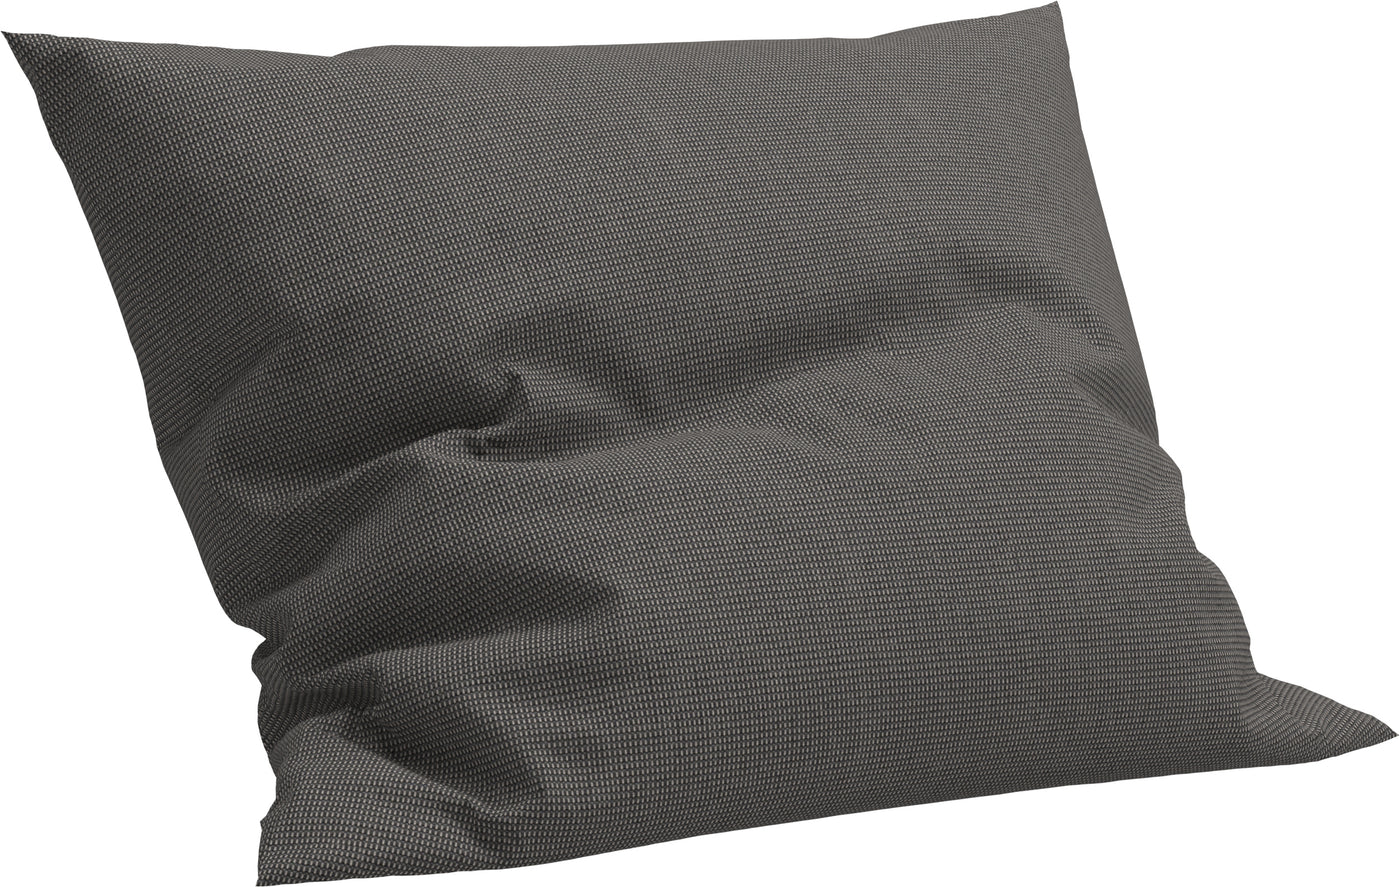 80cm x 65cm Relaxed Scatter Cushion